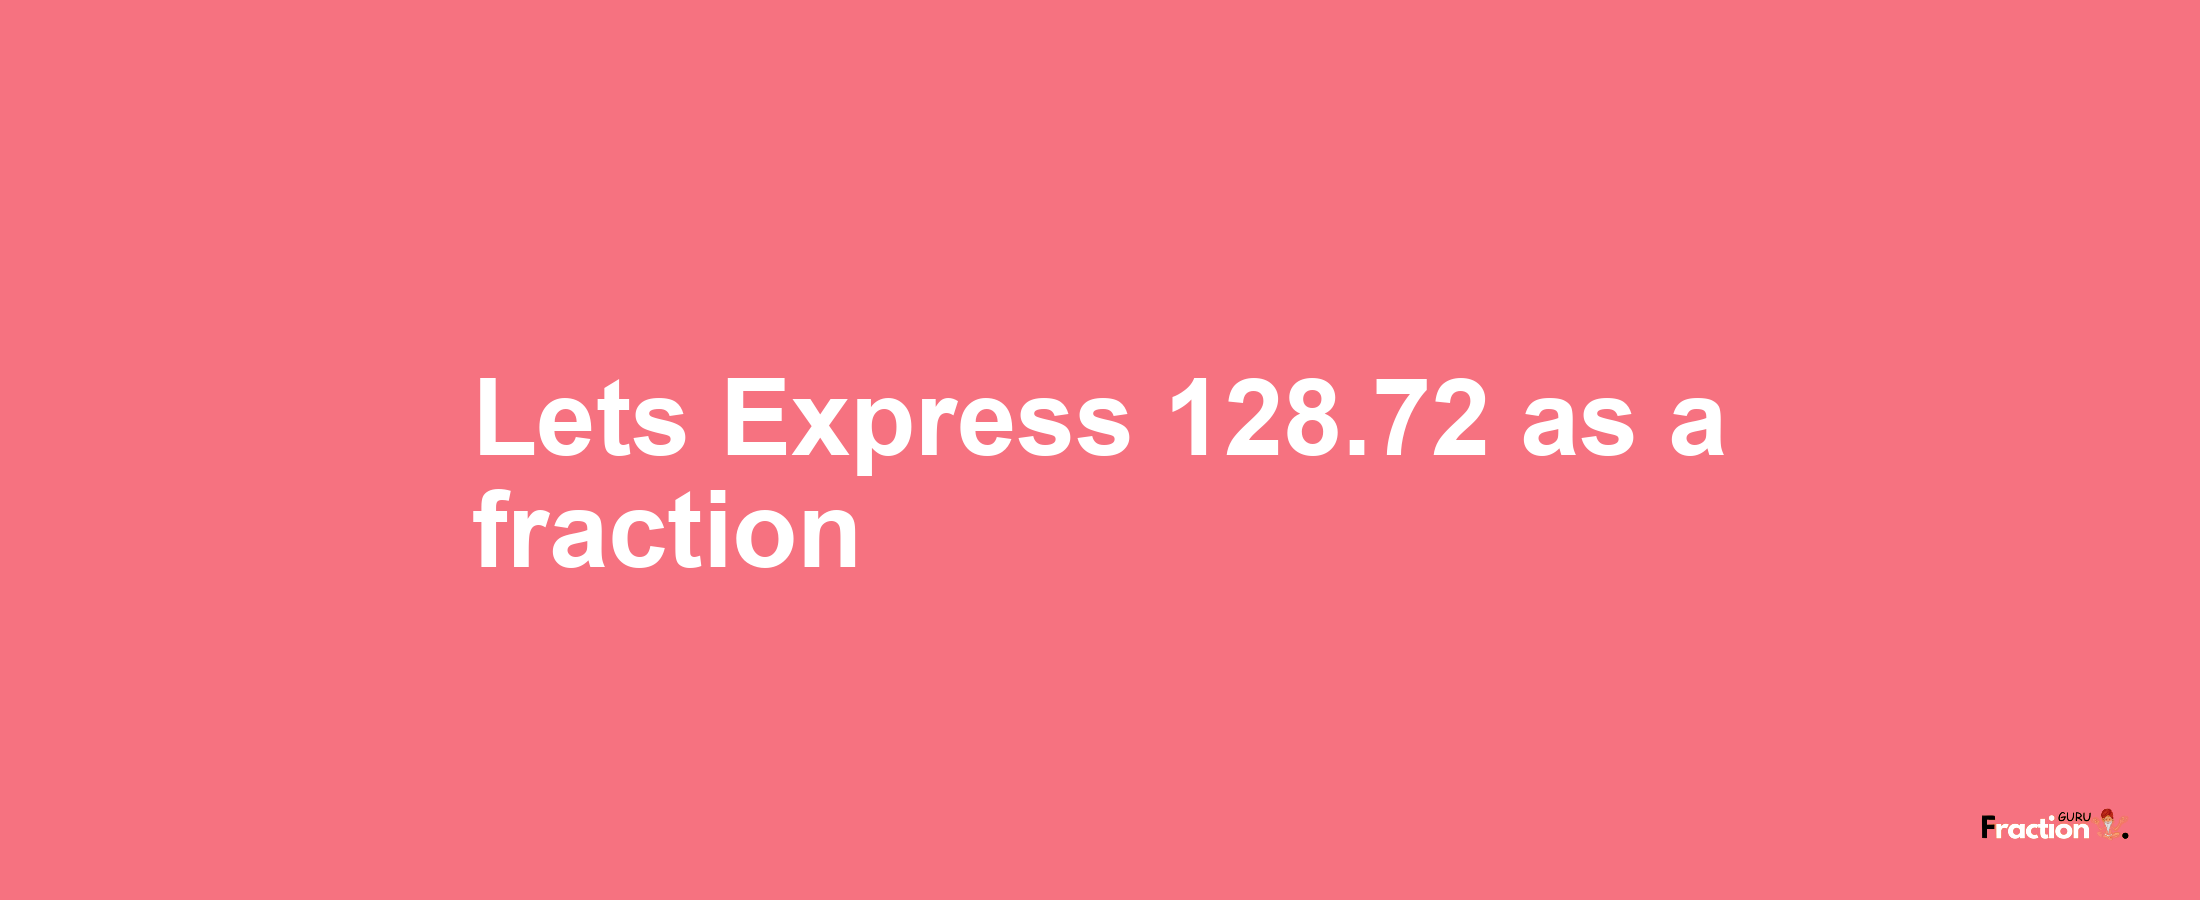 Lets Express 128.72 as afraction